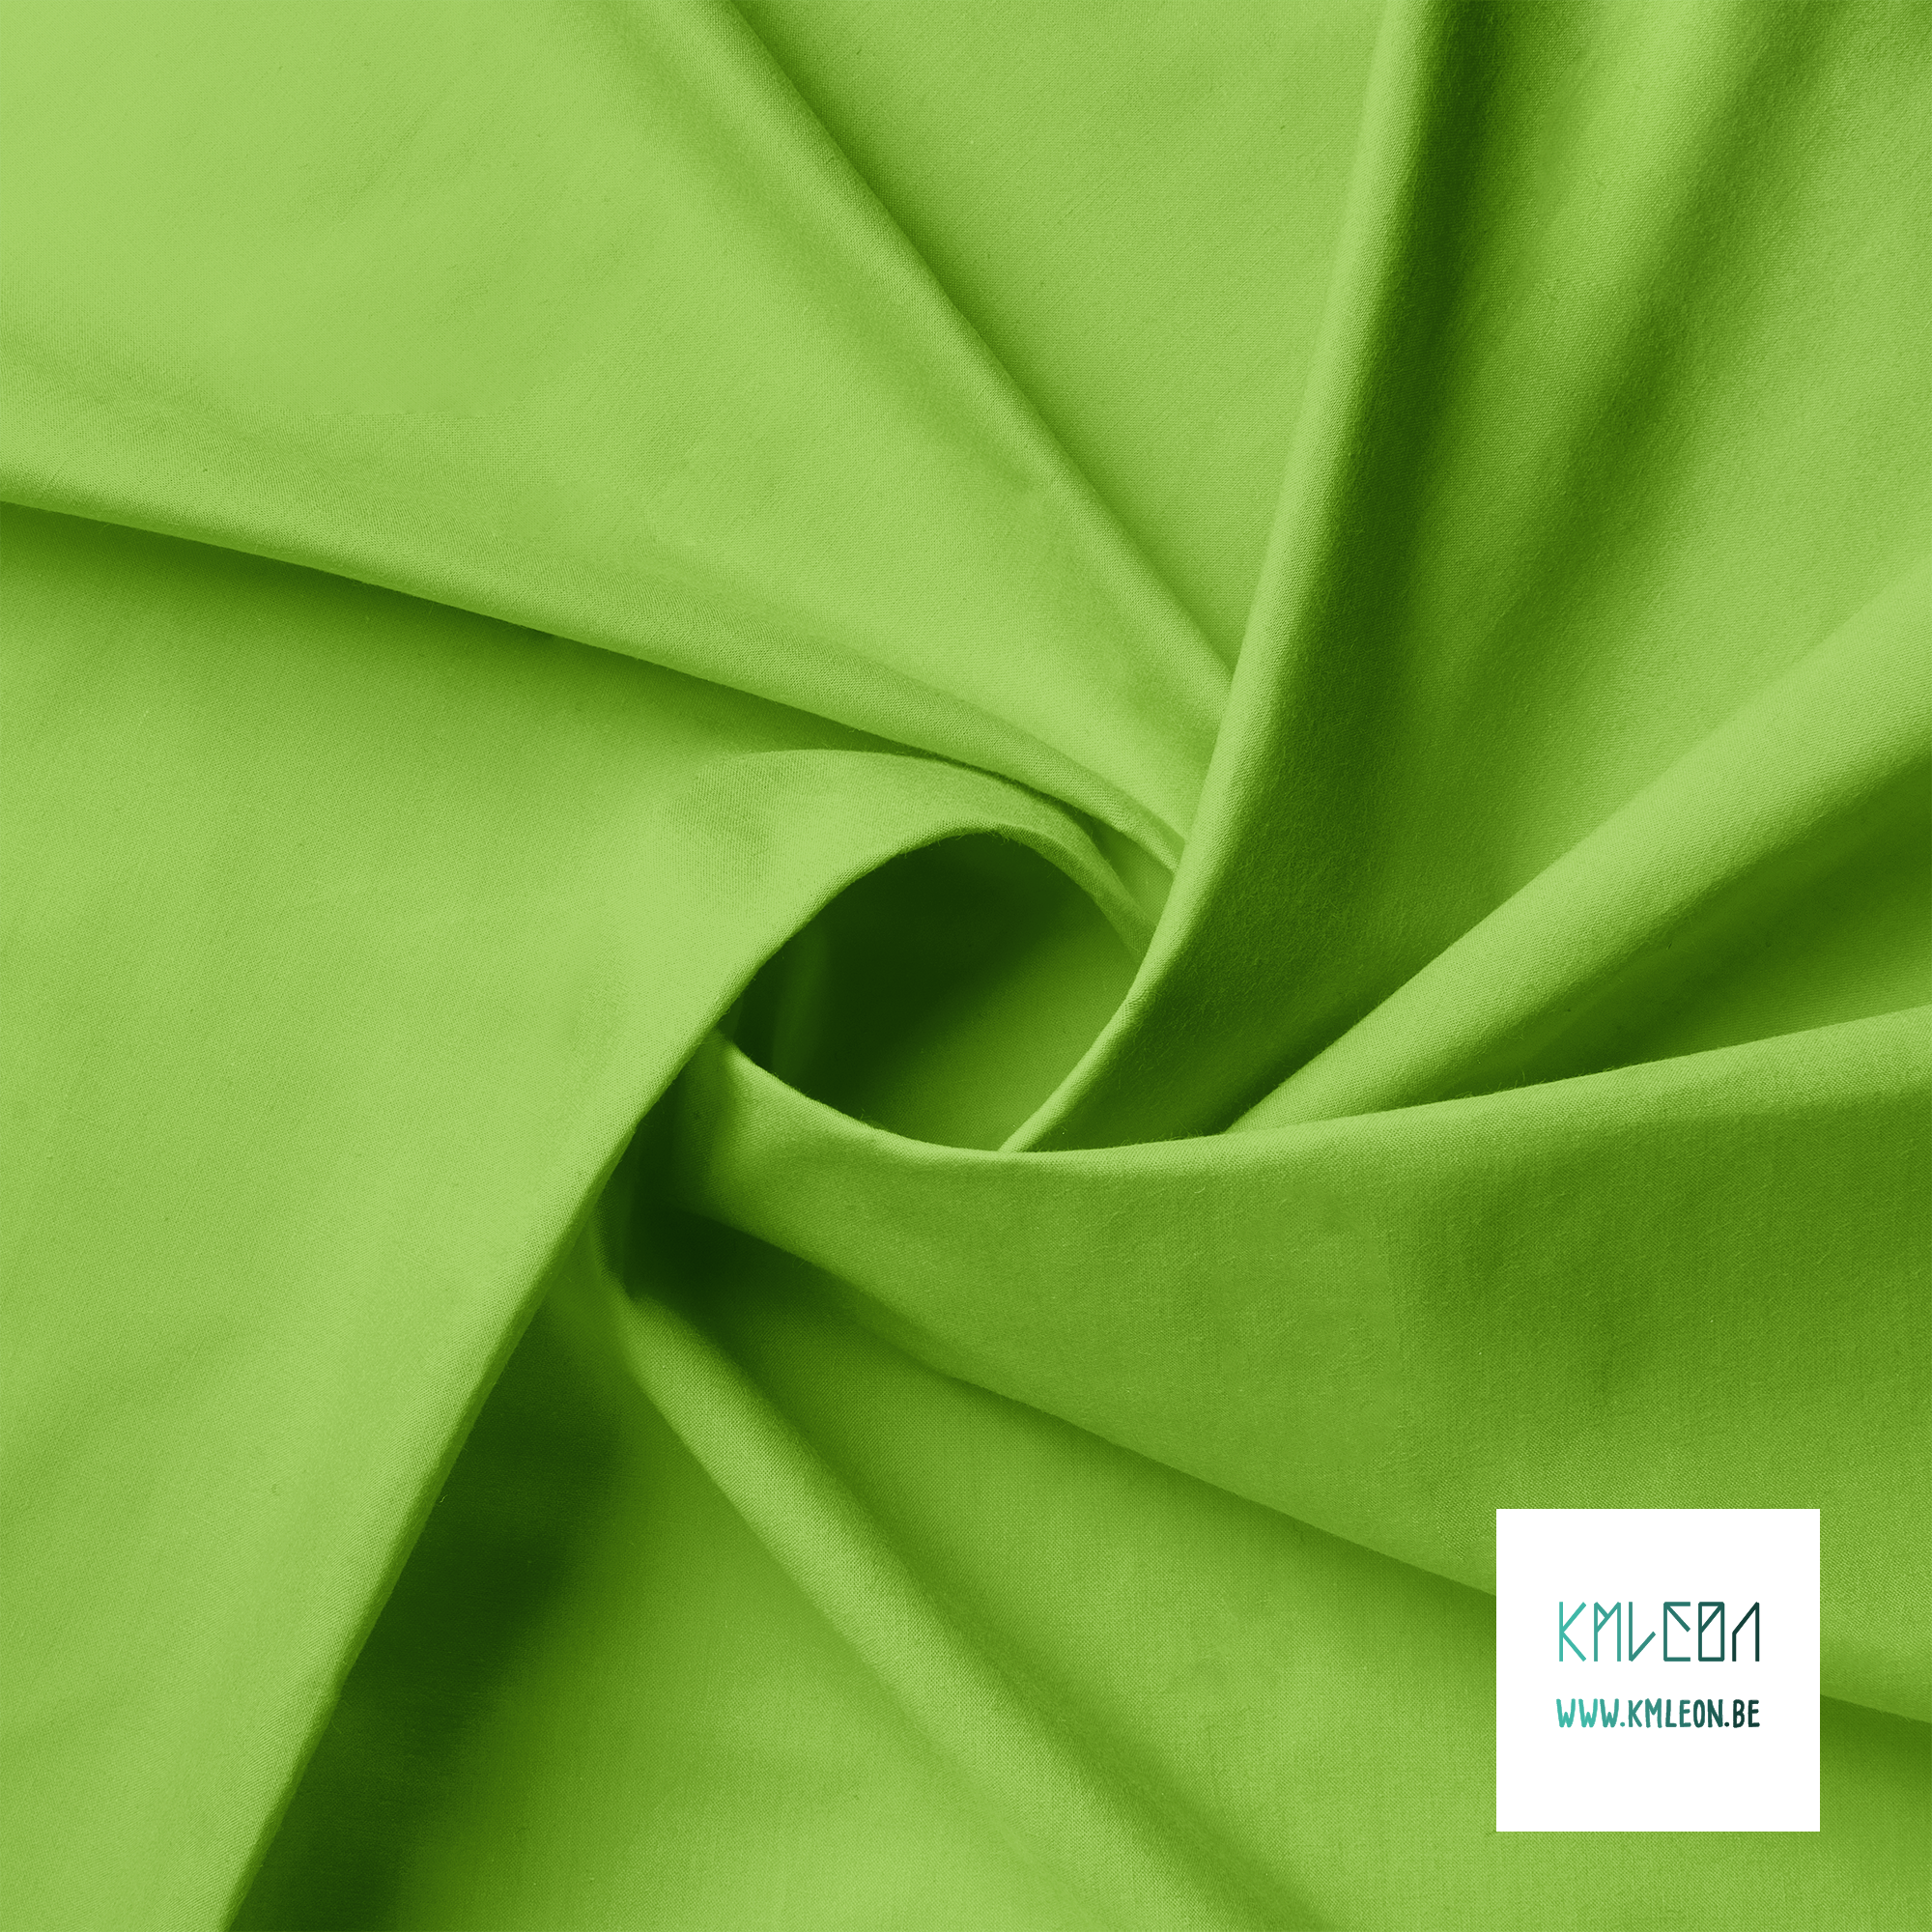 Solid pear green fabric